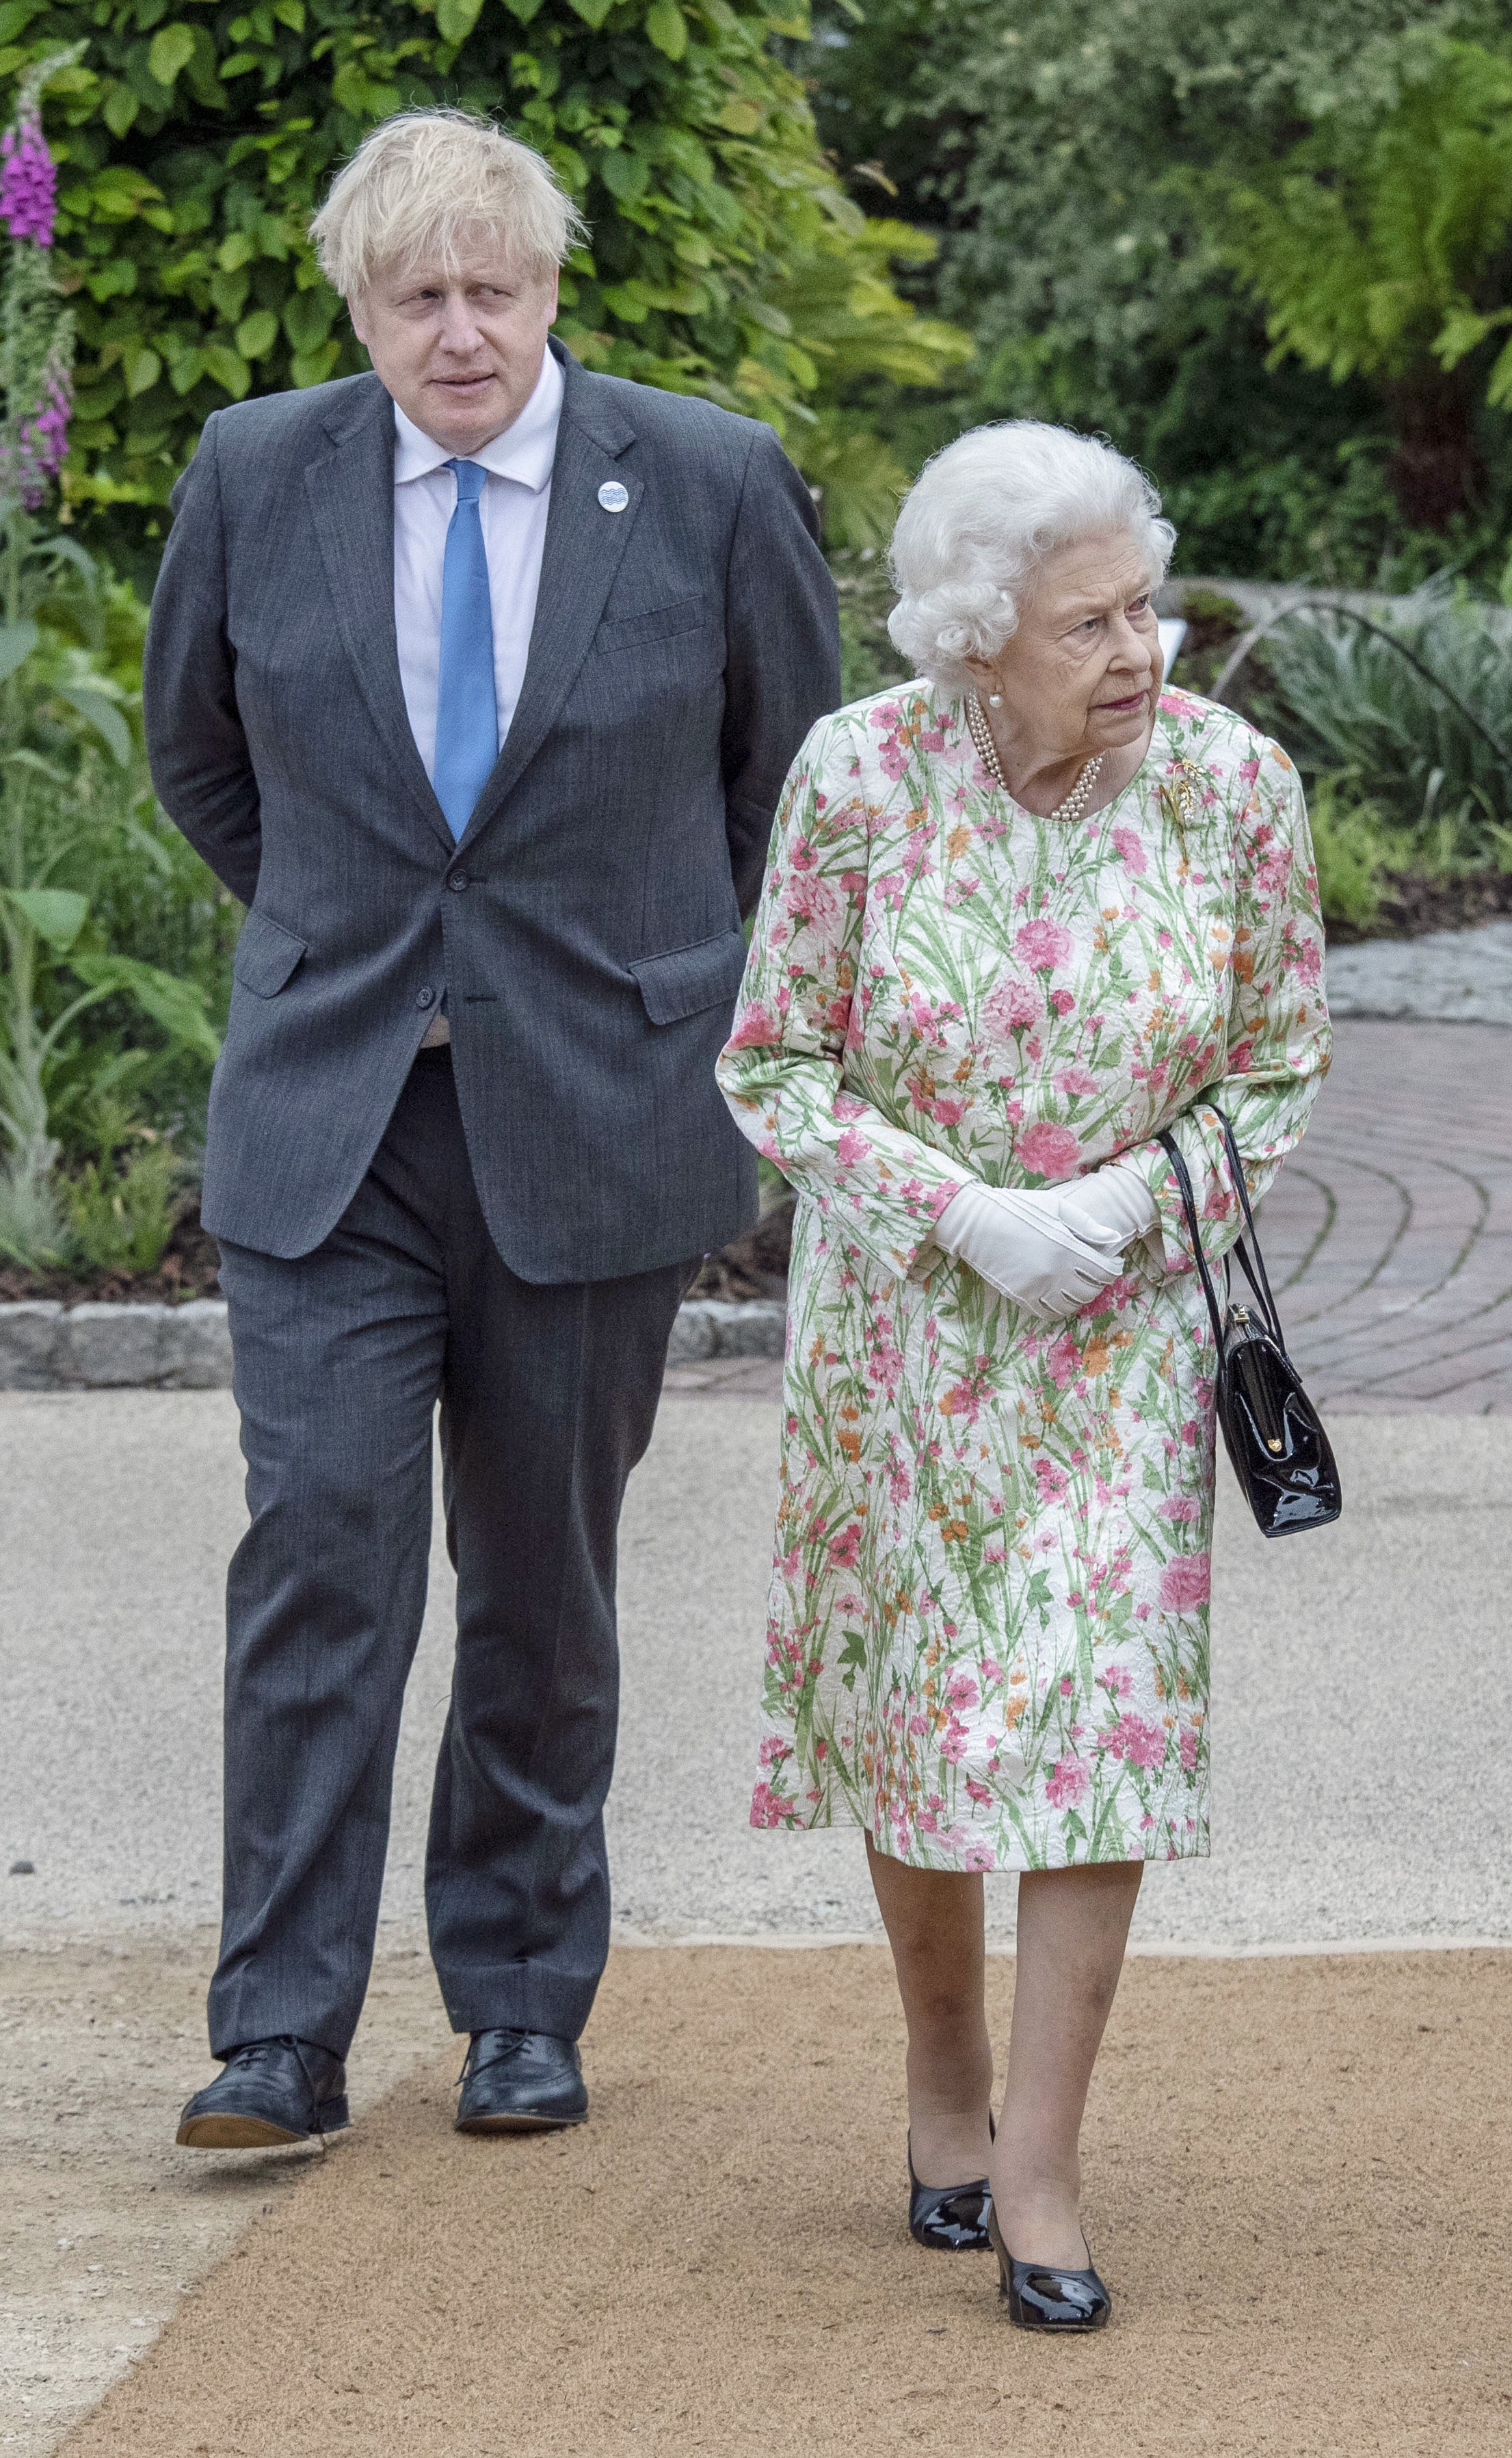 The Queen and Prime Minister Boris Johnson before a reception at the Eden Project during the G7 summit in Cornwall (Jack Hill/The Times/PA)